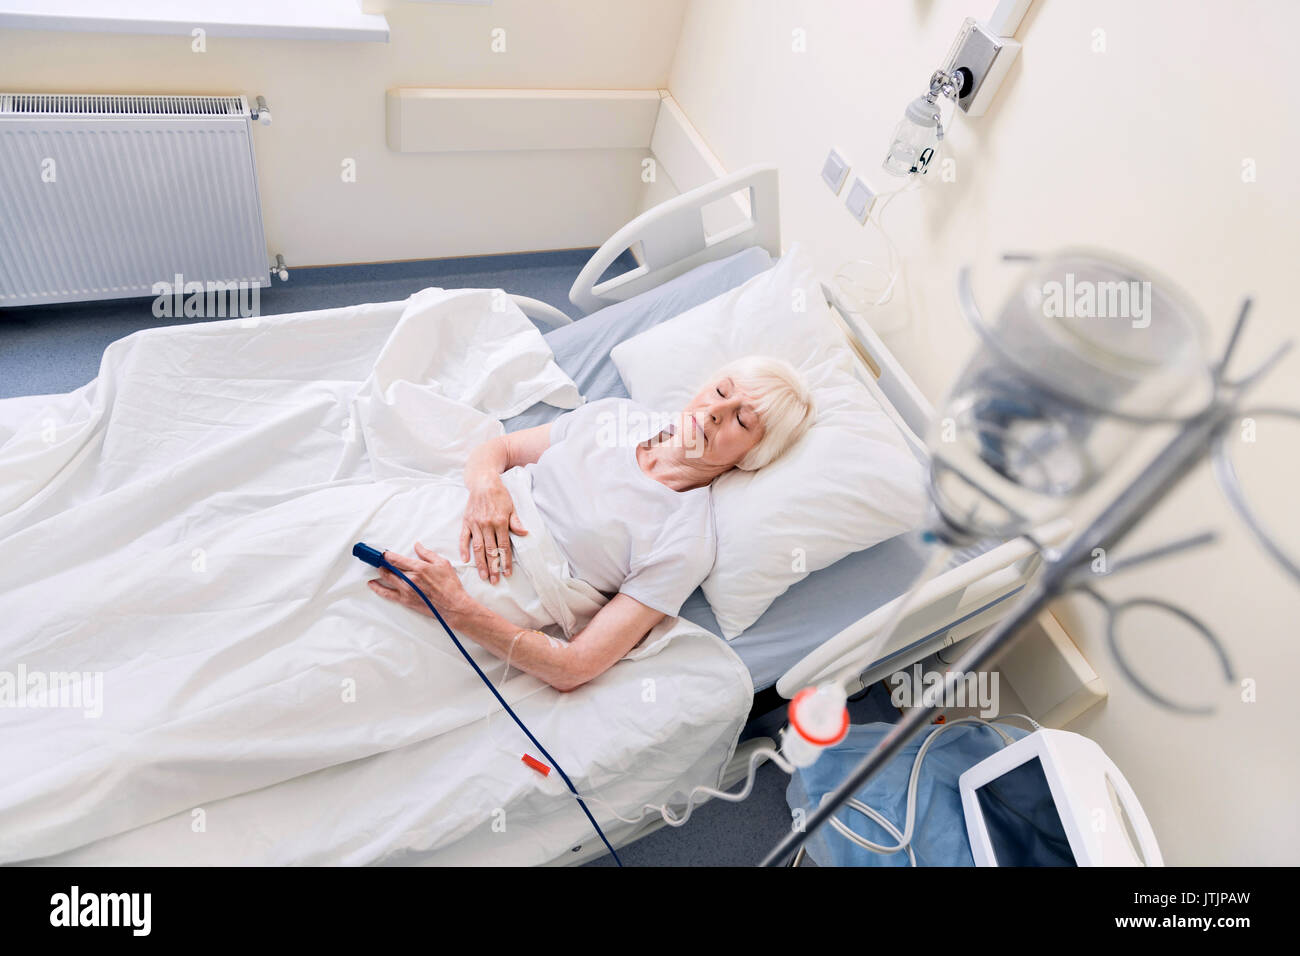 Feeble senior woman resting while recovering Stock Photo